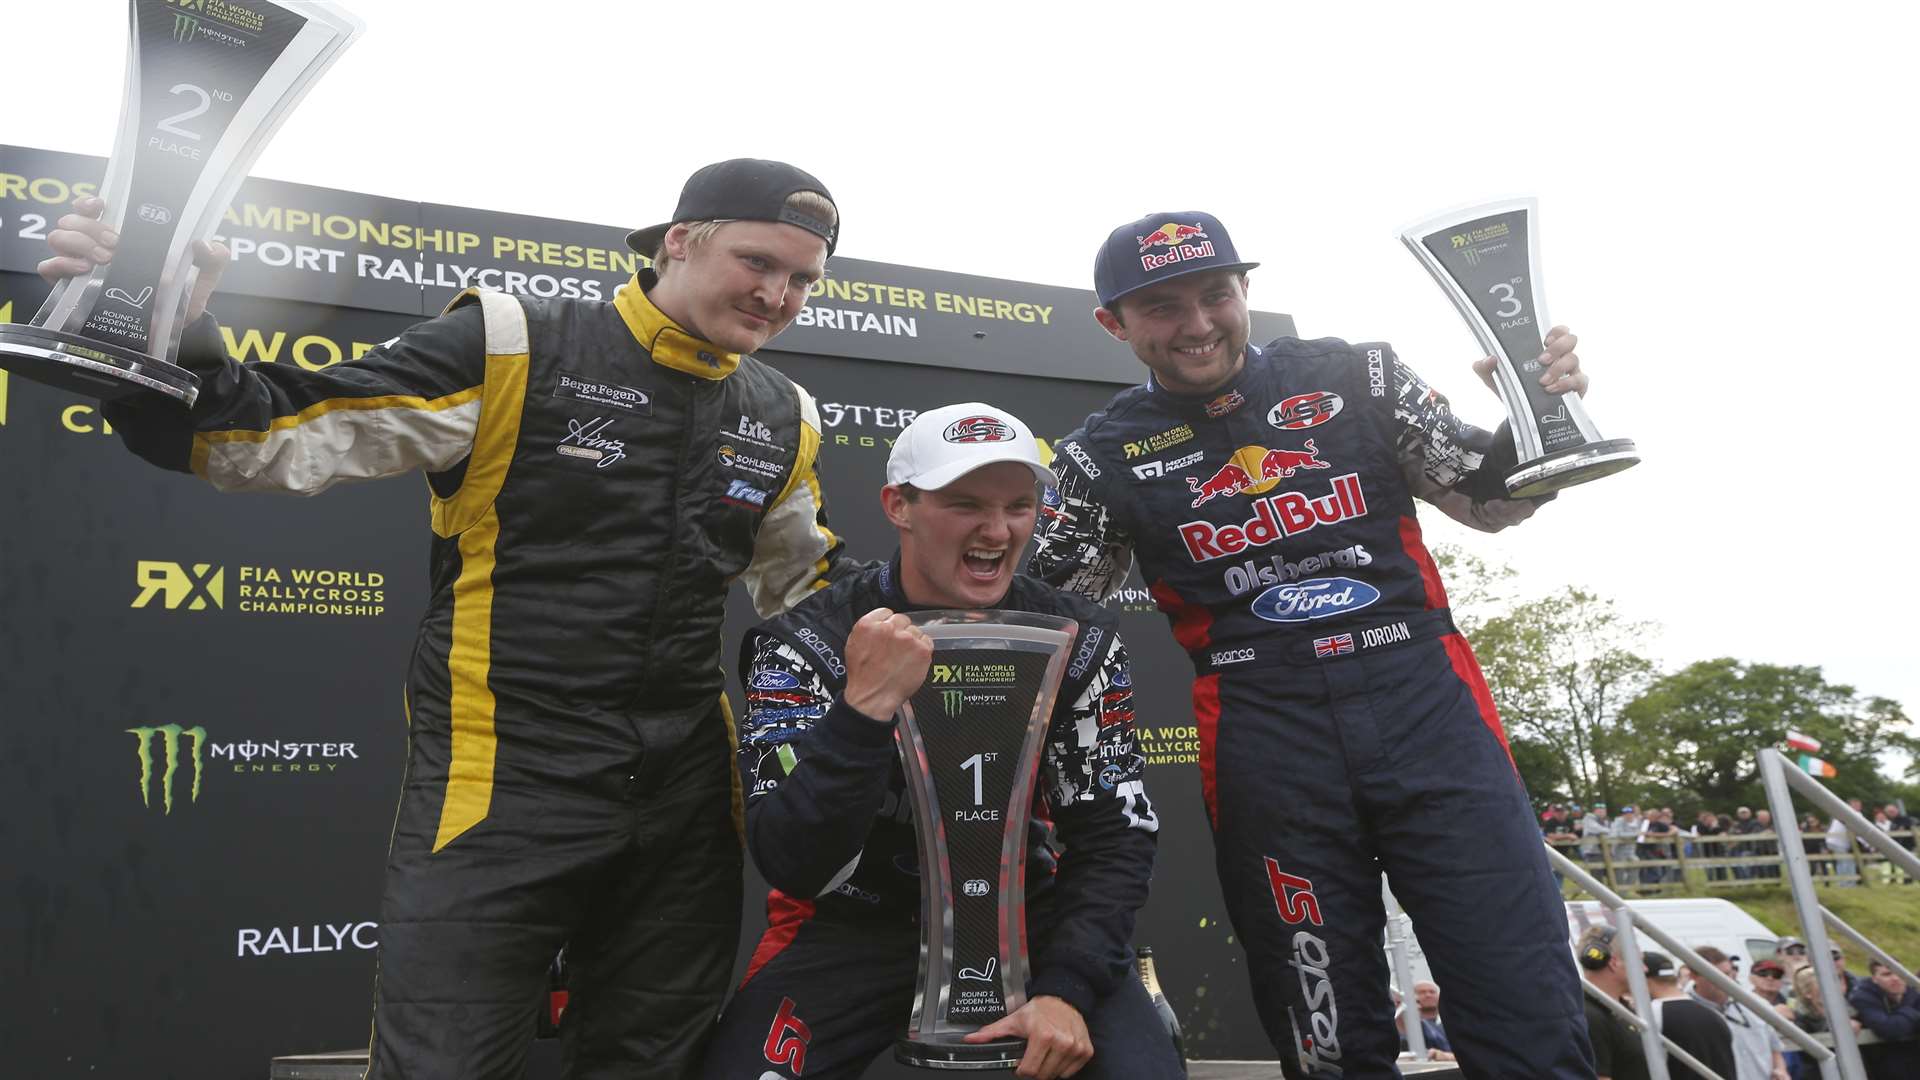 The World RX Supercar podium: Larsson, Bakkerud and Jordan. Picture: Lydden Hill Press Office